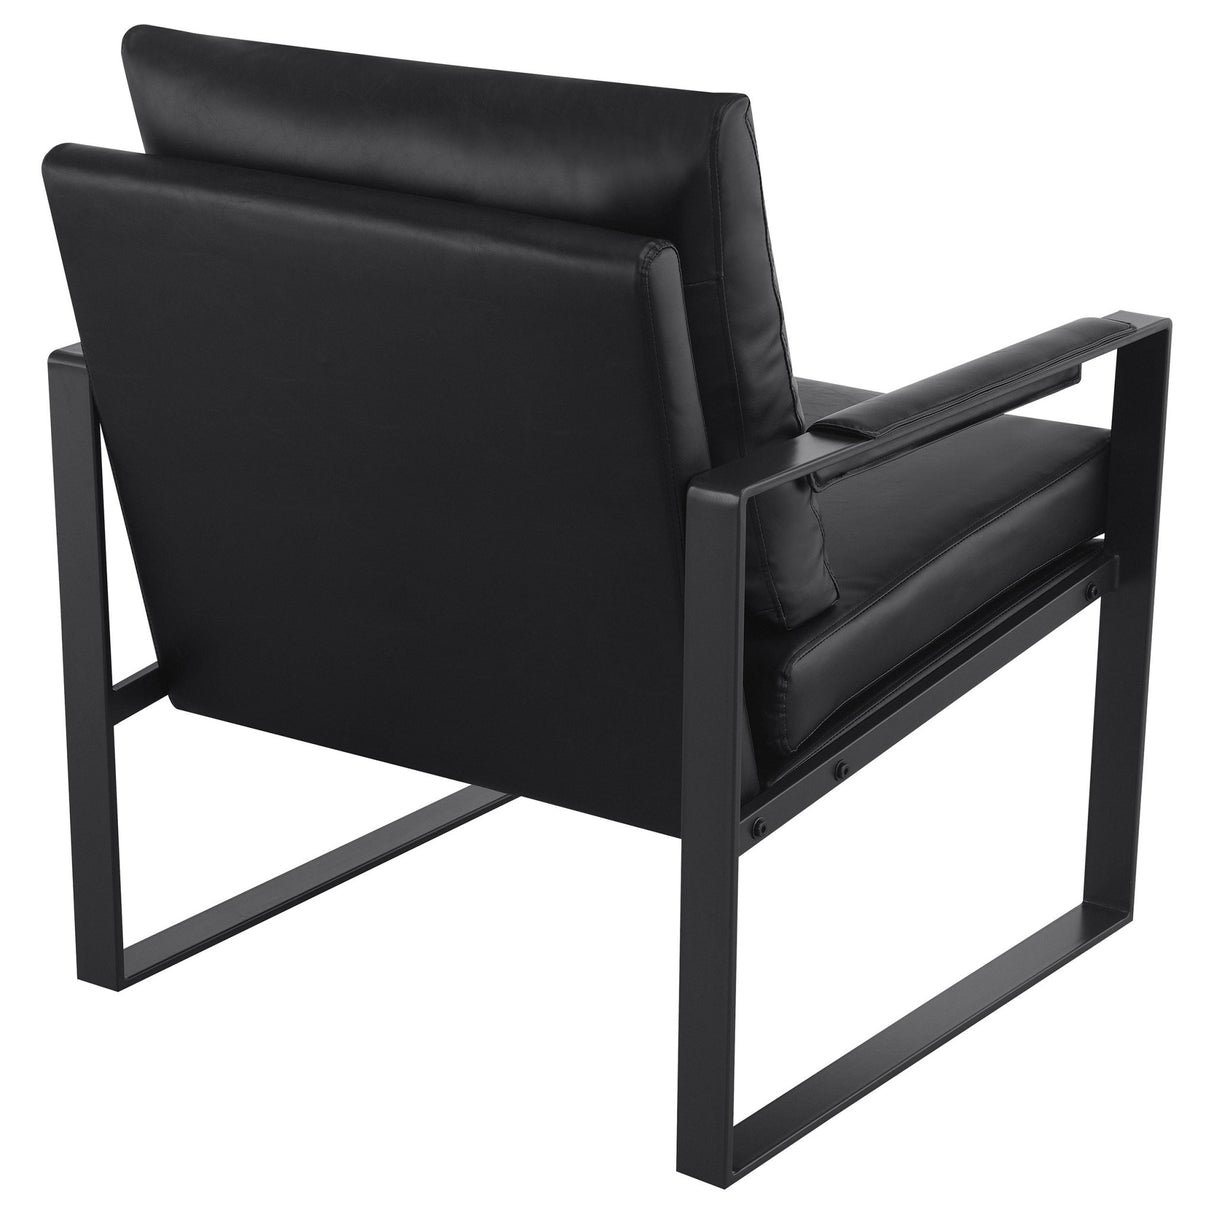 Accent Chair - Rosalind Upholstered Track Arms Accent Chair Black and Gummetal - Accent Chairs - 903021 - image - 6